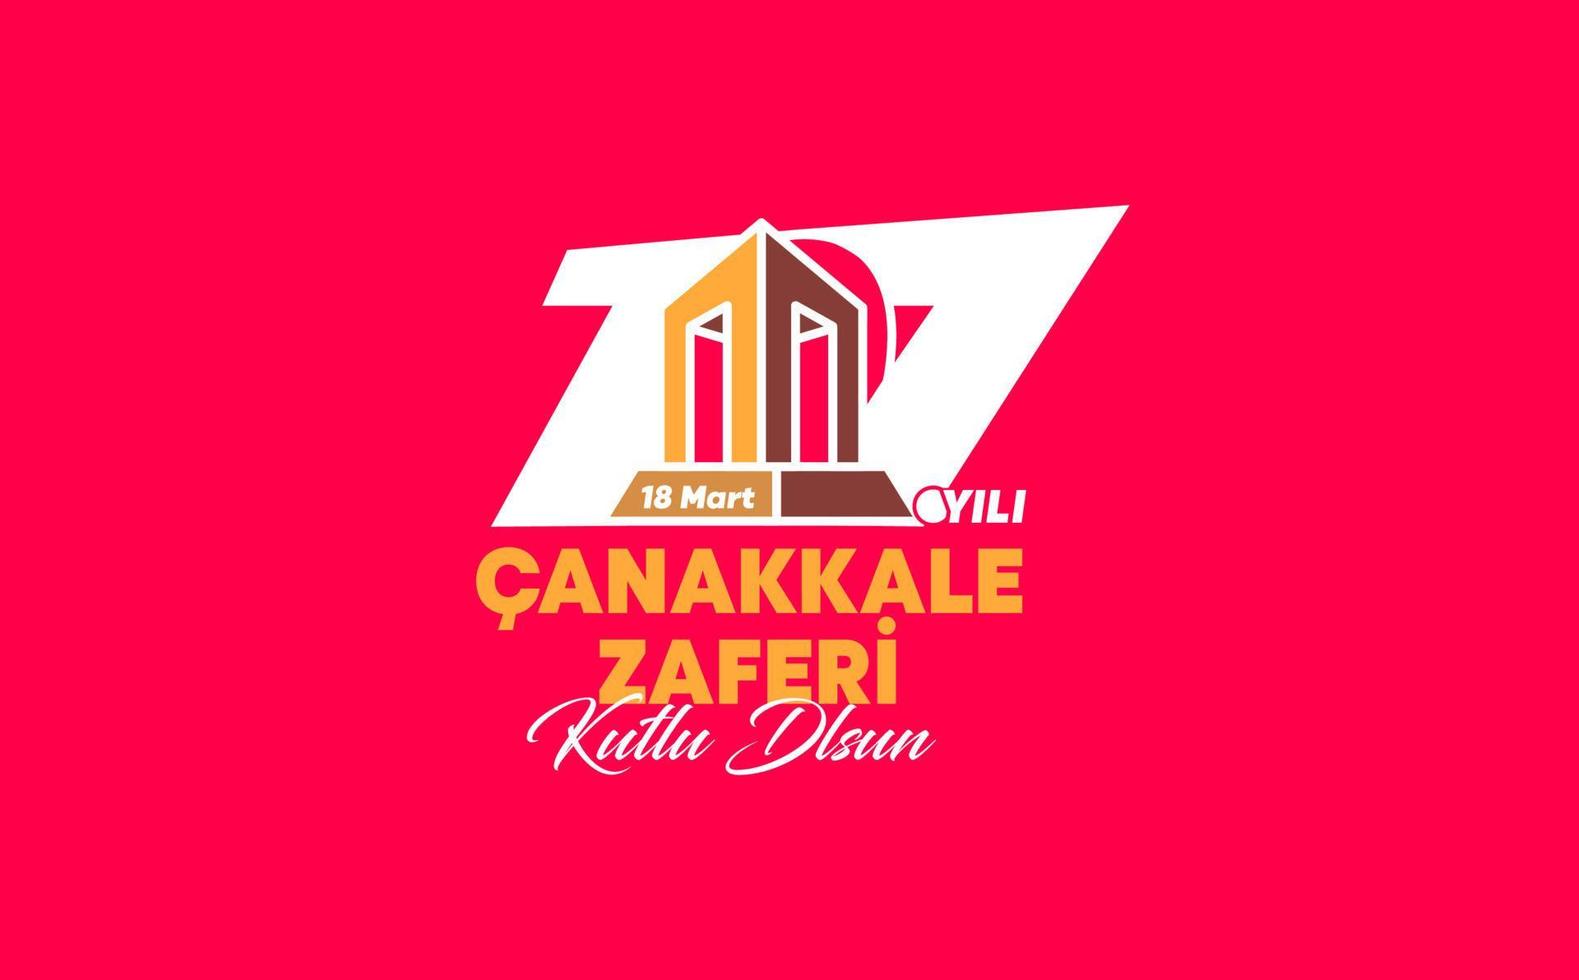 107th anniversary Canakkale Martyrs' Monument victory logotype. Translation 107. Happy 18 March Canakkale Victory. Canakkale monument congratulatory message on red background. vector